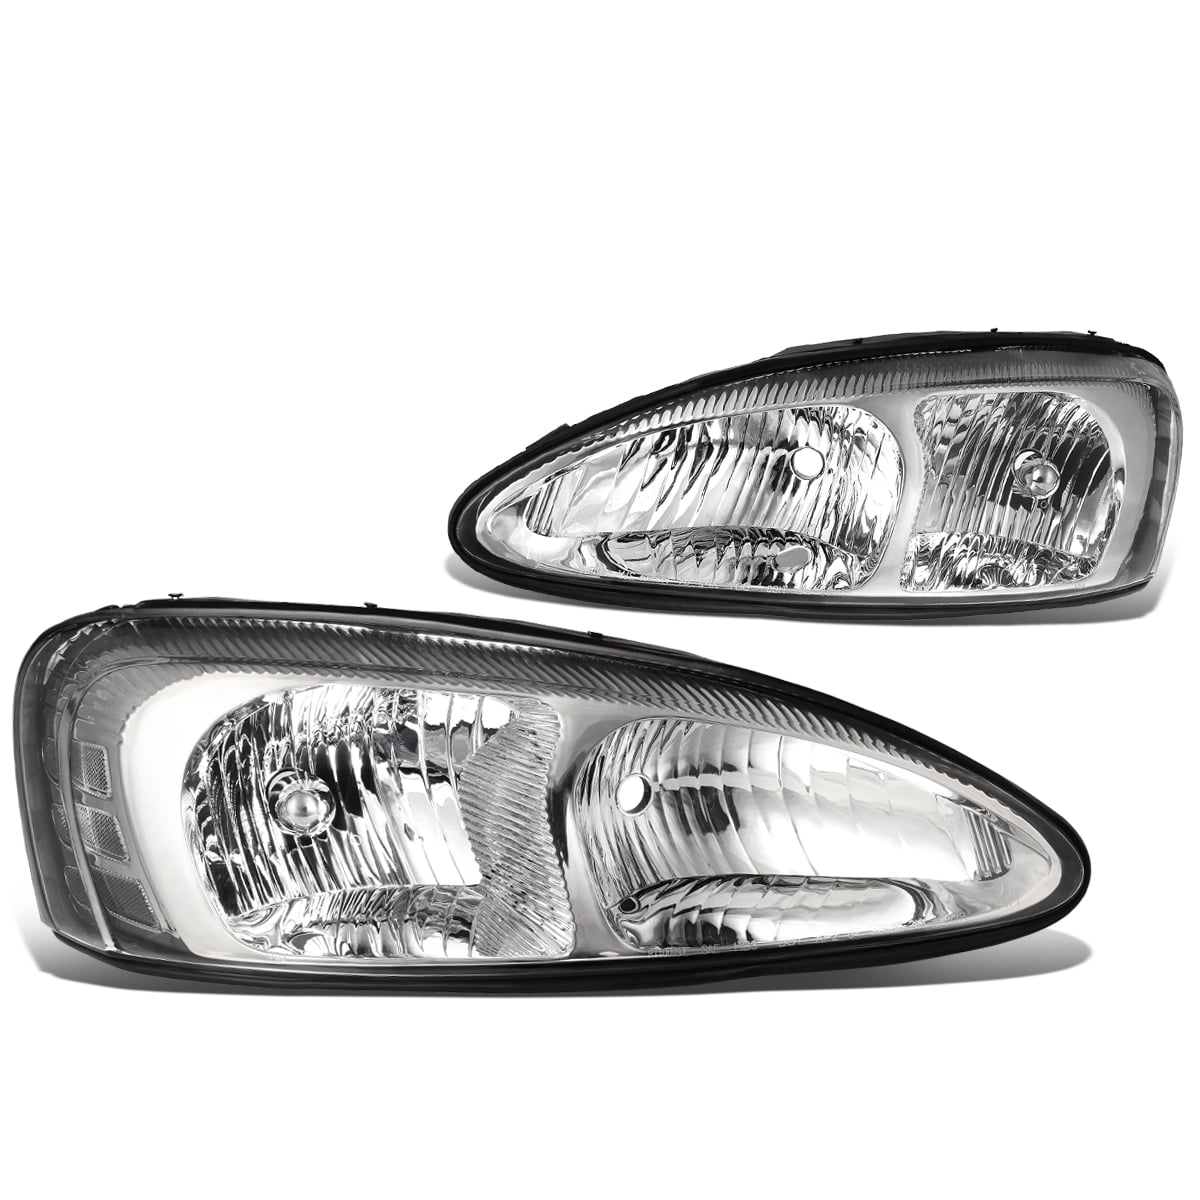 04-08 Pontiac Grand Prix DNA MOTORING Black clear HL-OH-PGPR04-BK-CL1 Pair of Headlight Assembly 